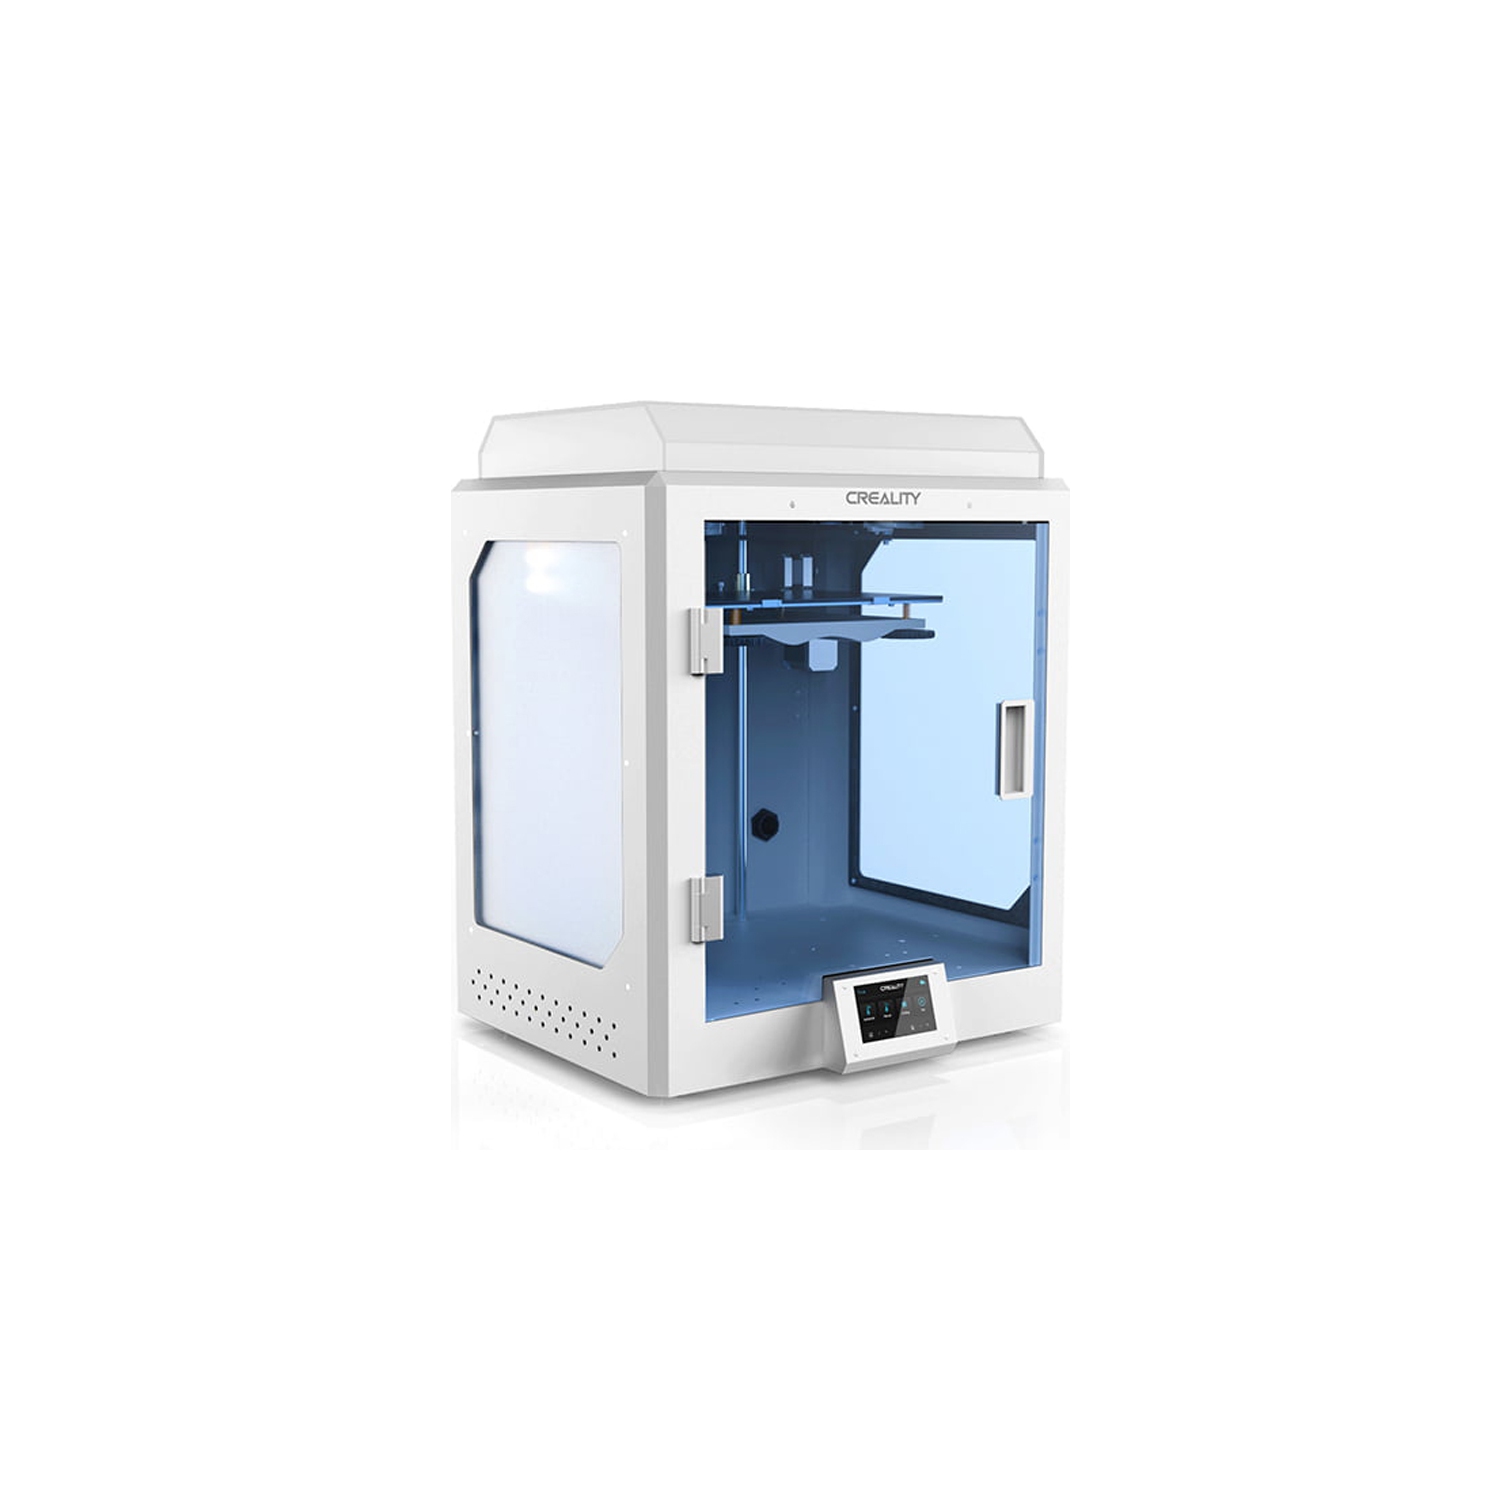 Creality CR-5 Pro 3D Printer High-Temp Version, for Semi-Automatic Exotic Materials, FDM 3D Printer Auto Leveling Wi-Fi, Home and Professional Use, Support PLA, ABS, Nylon